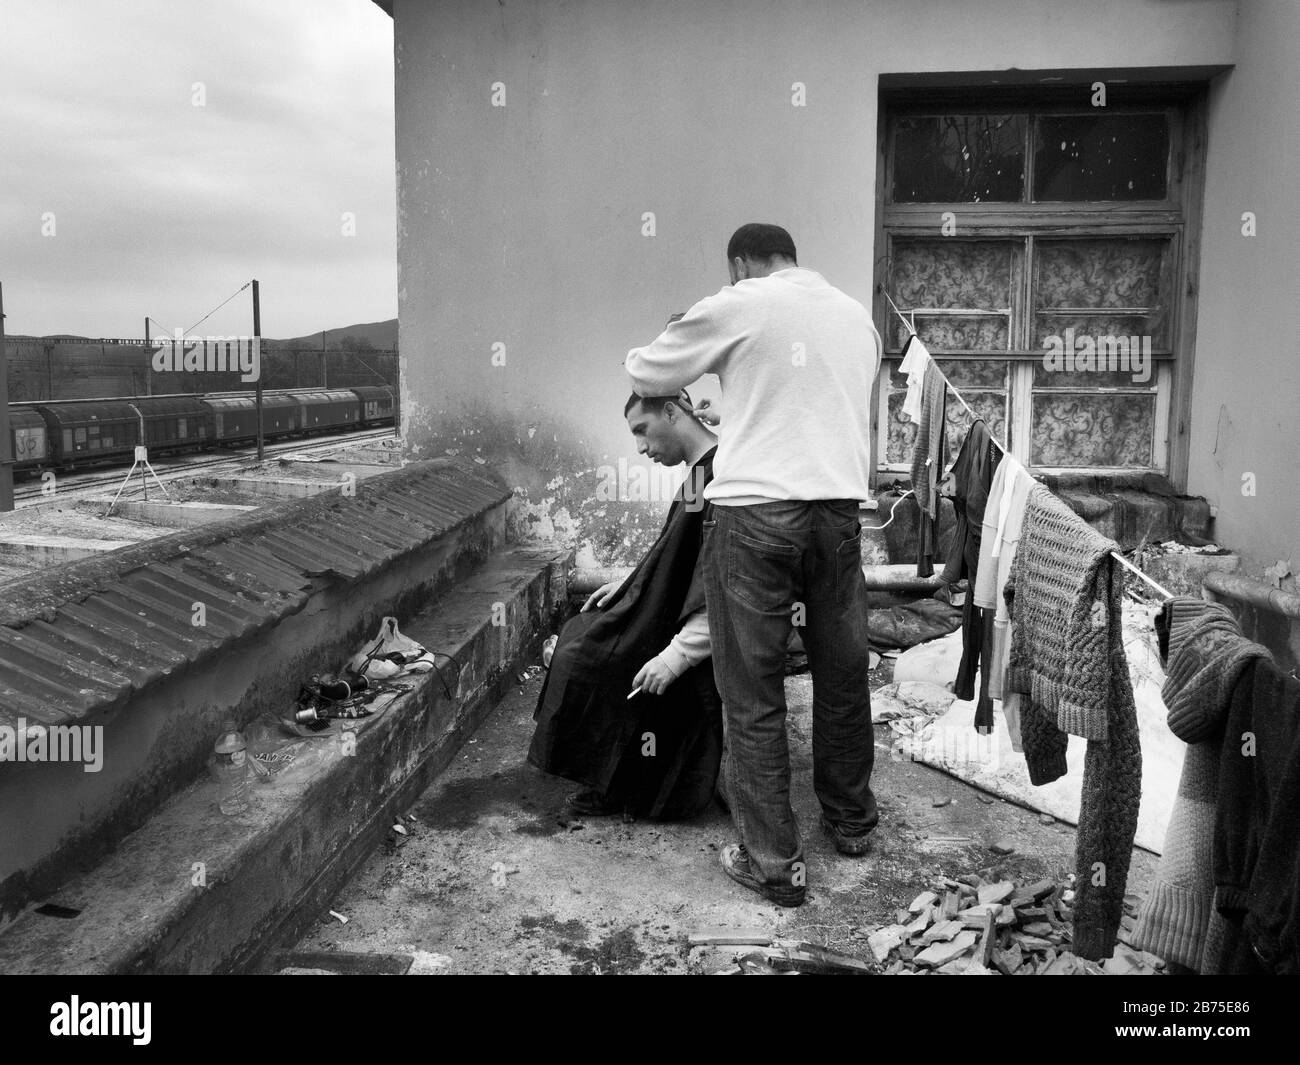 Refugee camp in Idomeni on the border with Macedonia. On a roof at the train station in Idomeni a hairdresser cuts a man's hair. [automated translation] Stock Photo